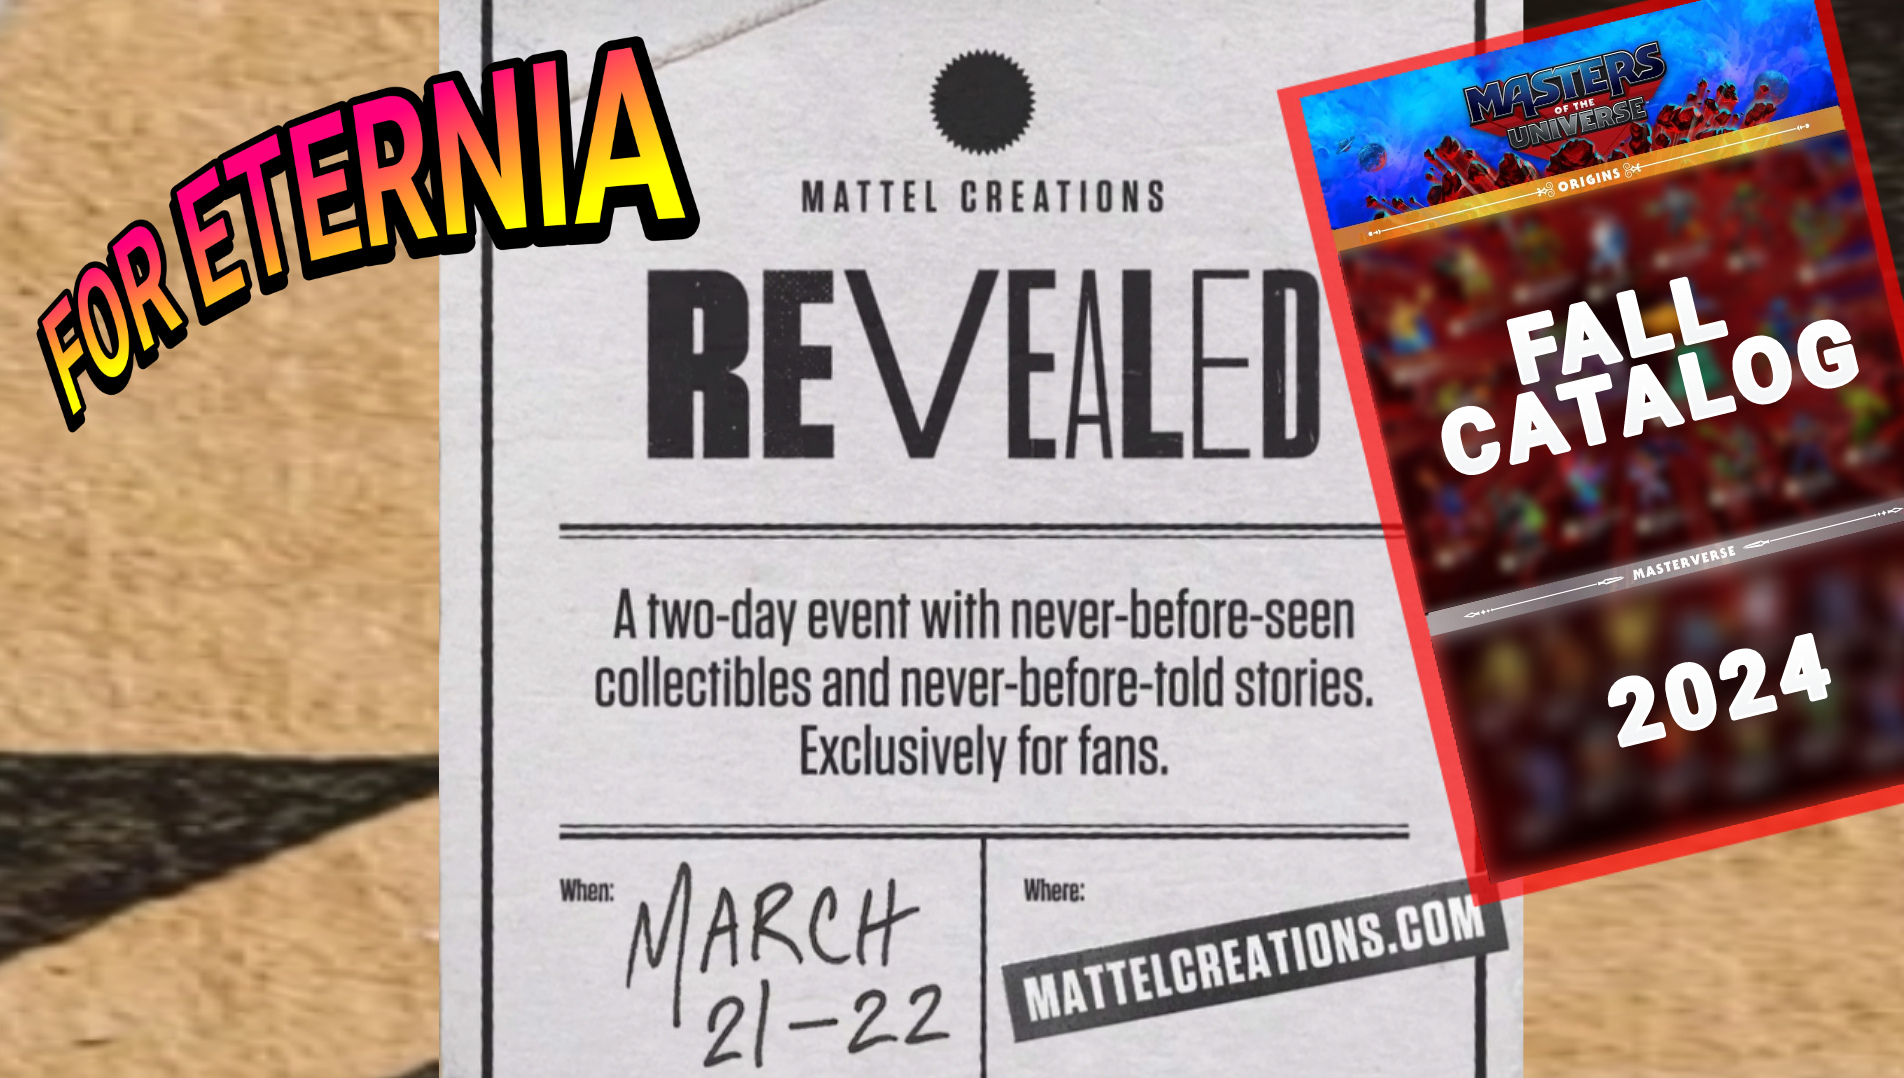 New ”Mattel Creations REVEALED” Virtual Event to feature Origins & Masterverse Fall 2024 Catalog?